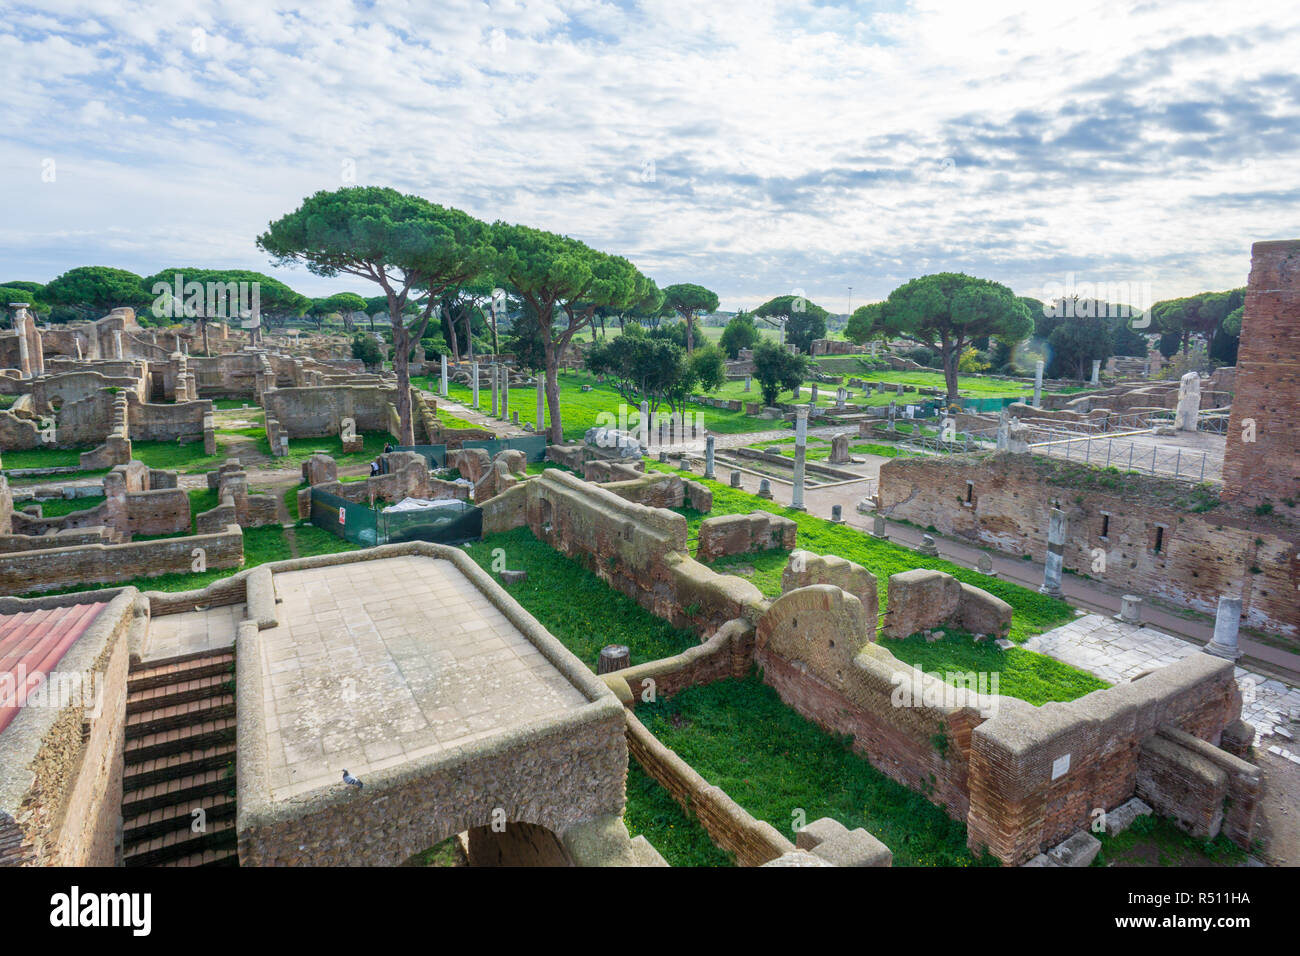 Ostia antica in Rome, Italy. Landscape in the Roman archaeological ruins Stock Photo